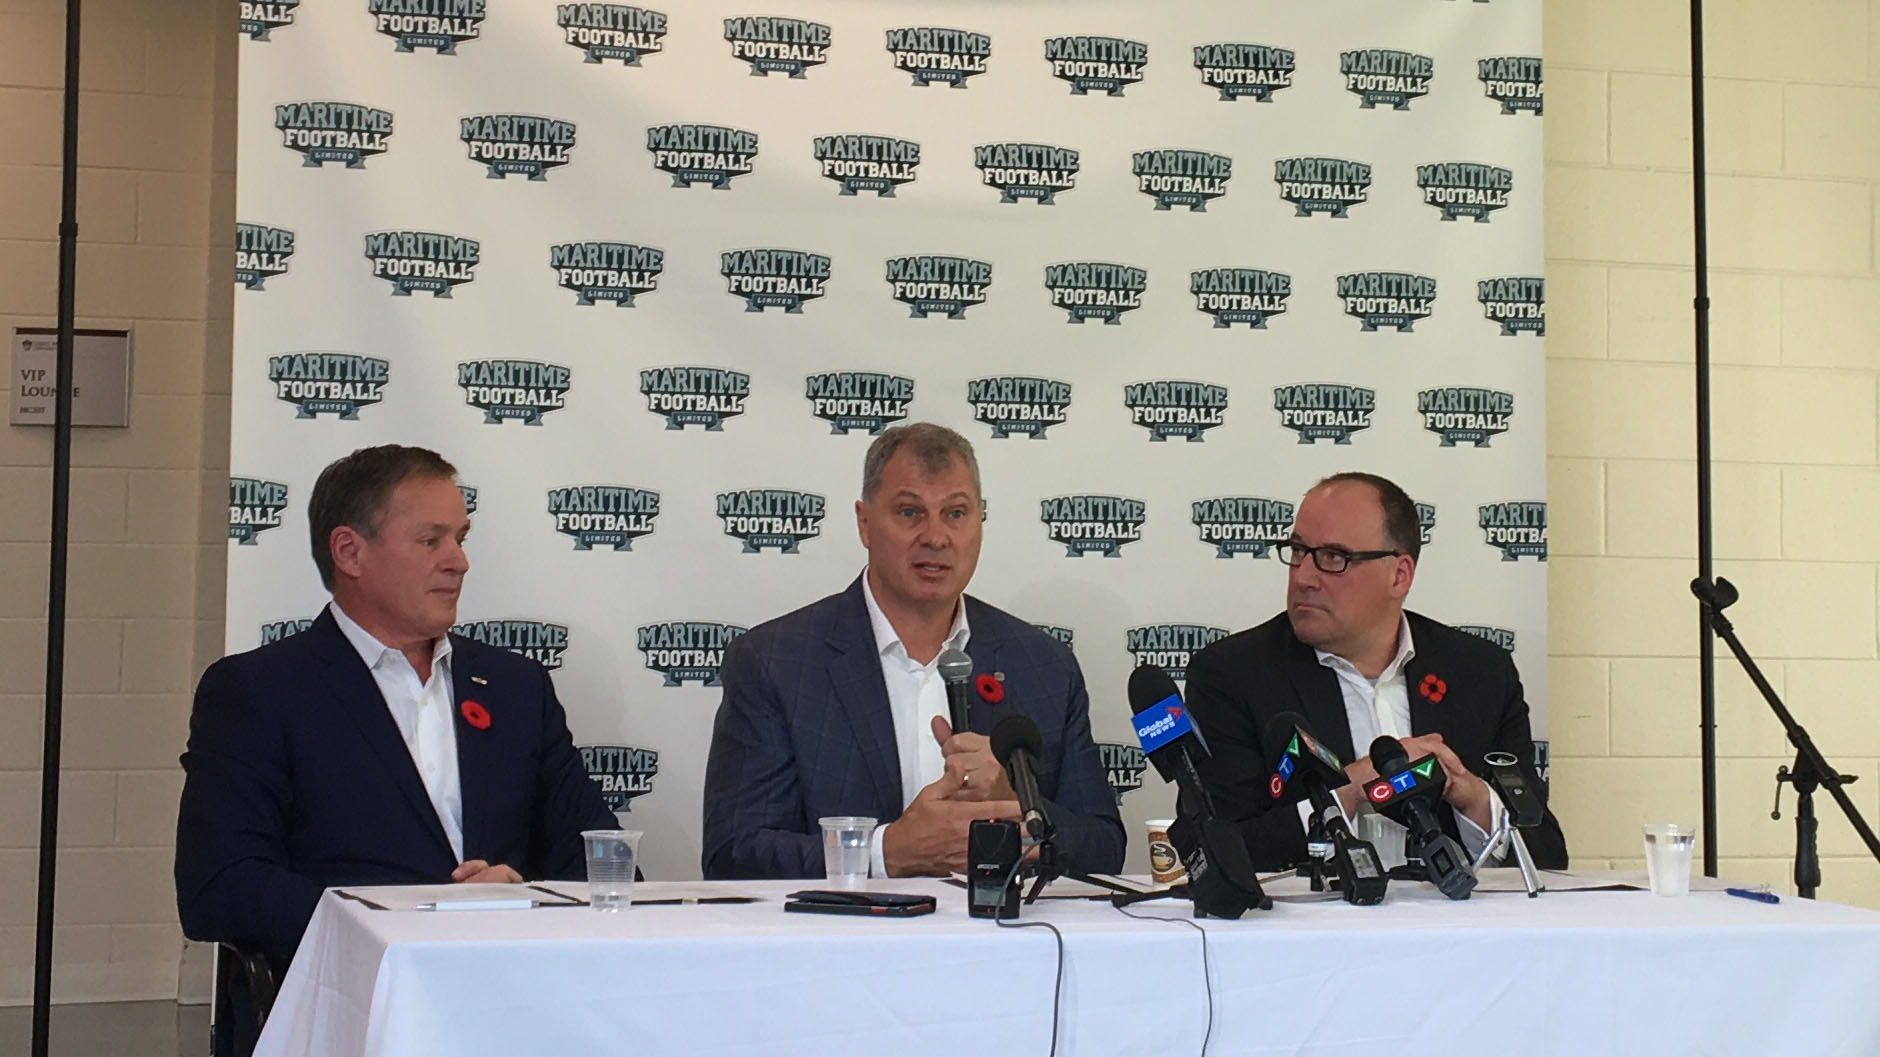 CFL Commissioner Randy Ambrosie (centre) answers questions while Bruce Bowser (left) and Anthony LeBlanc (right) founding partners of Maritime Football Ltd. listen at the Nov. 7 press conference